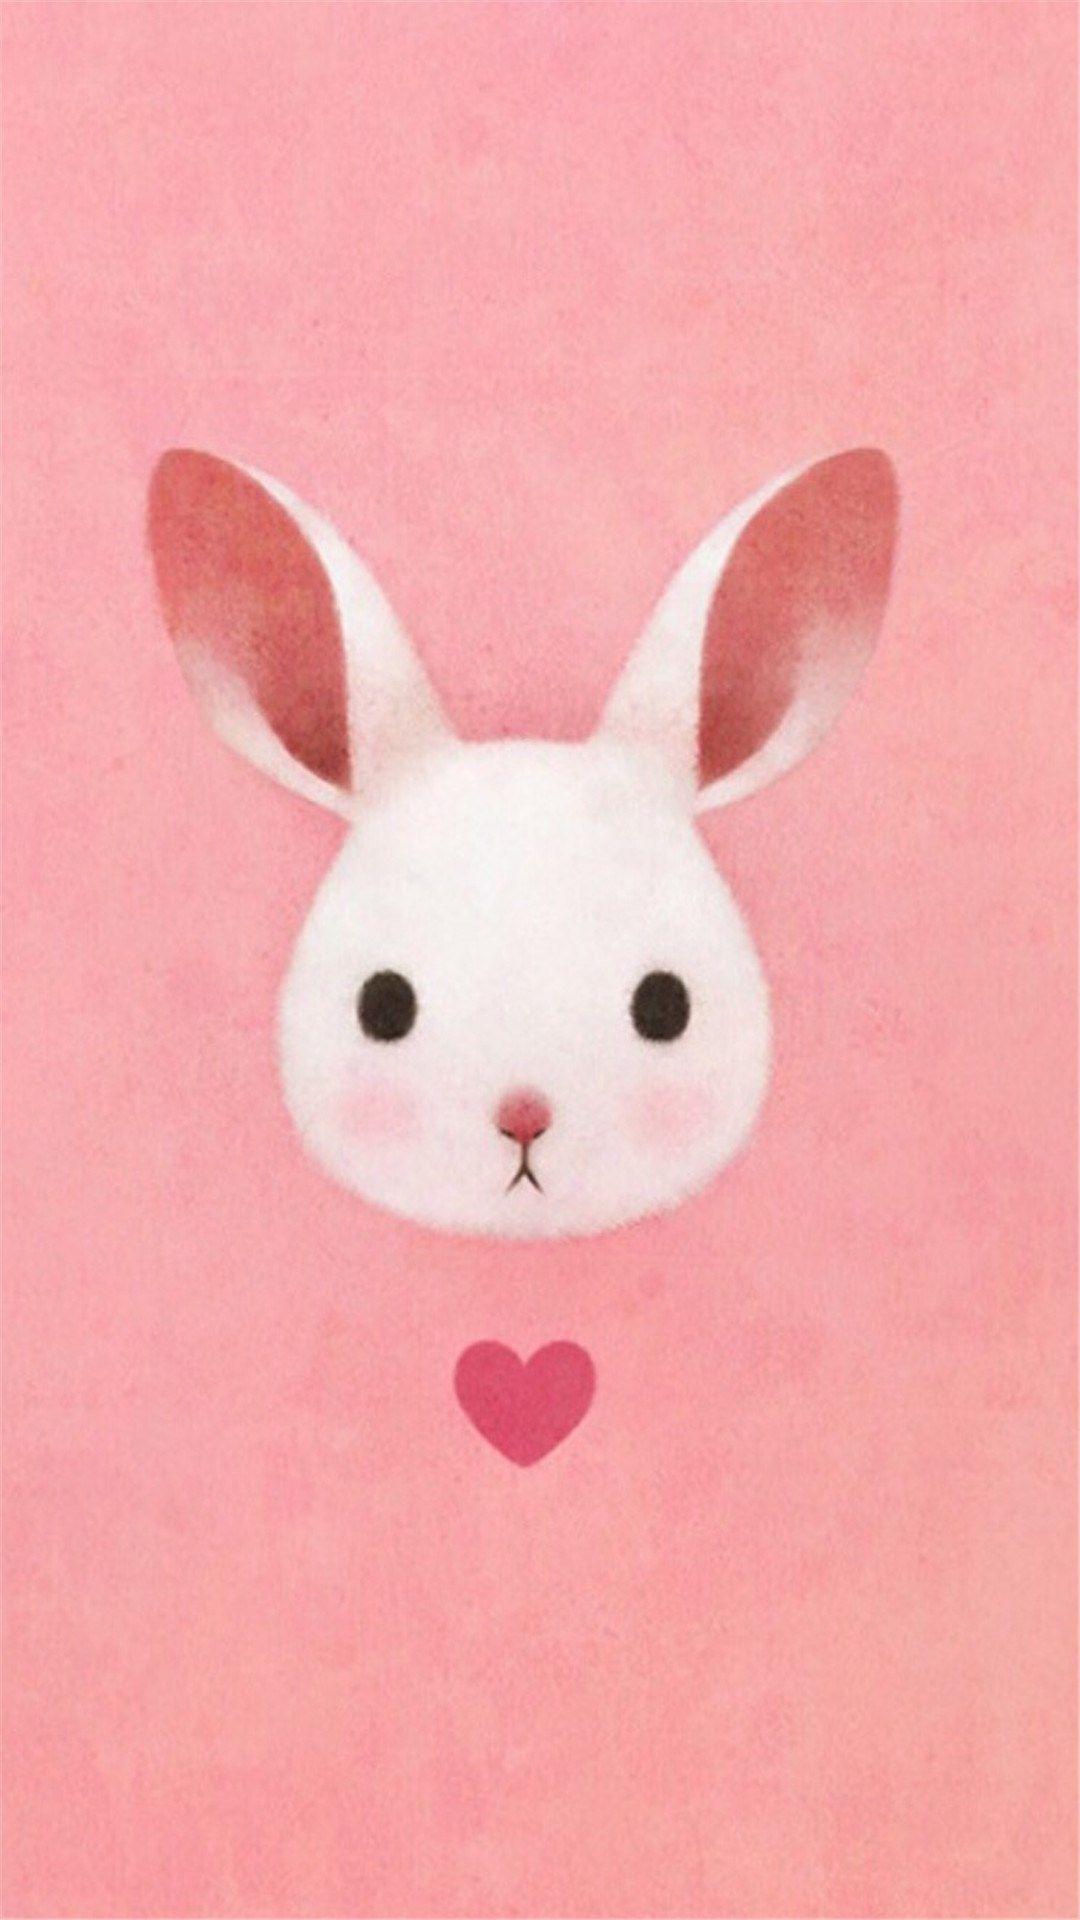 Cute Lovely Pink Rabbit Drawing Art IPhone 6 Wallpaper Download. IPhone Wallpaper, IPad Wallpaper One Stop Downl. Rabbit Drawing, Bunny Art, Heart Illustration